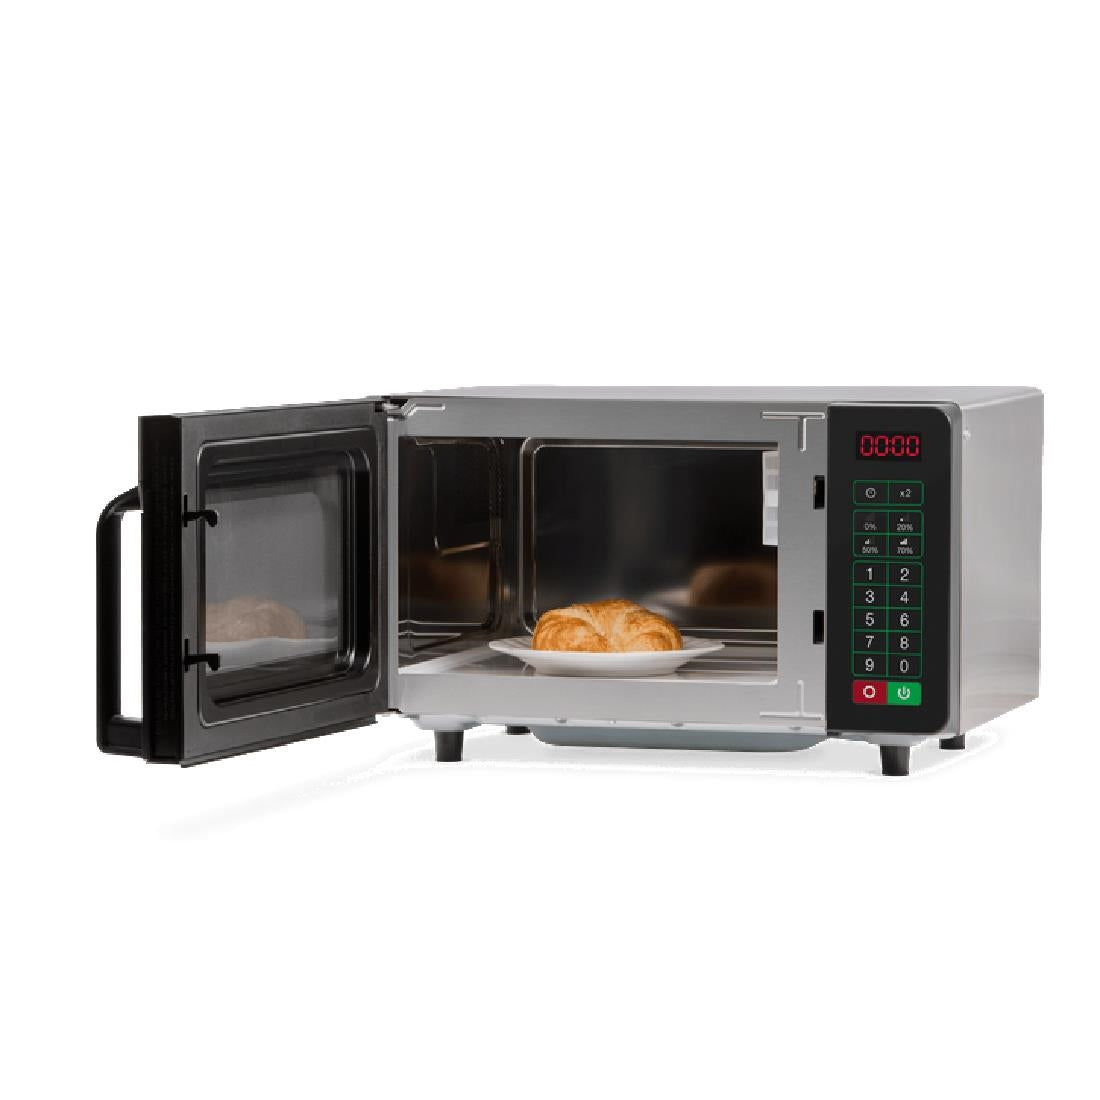 Menumaster Light Duty Touch Pad Microwave RMS510TS2UA JD Catering Equipment Solutions Ltd